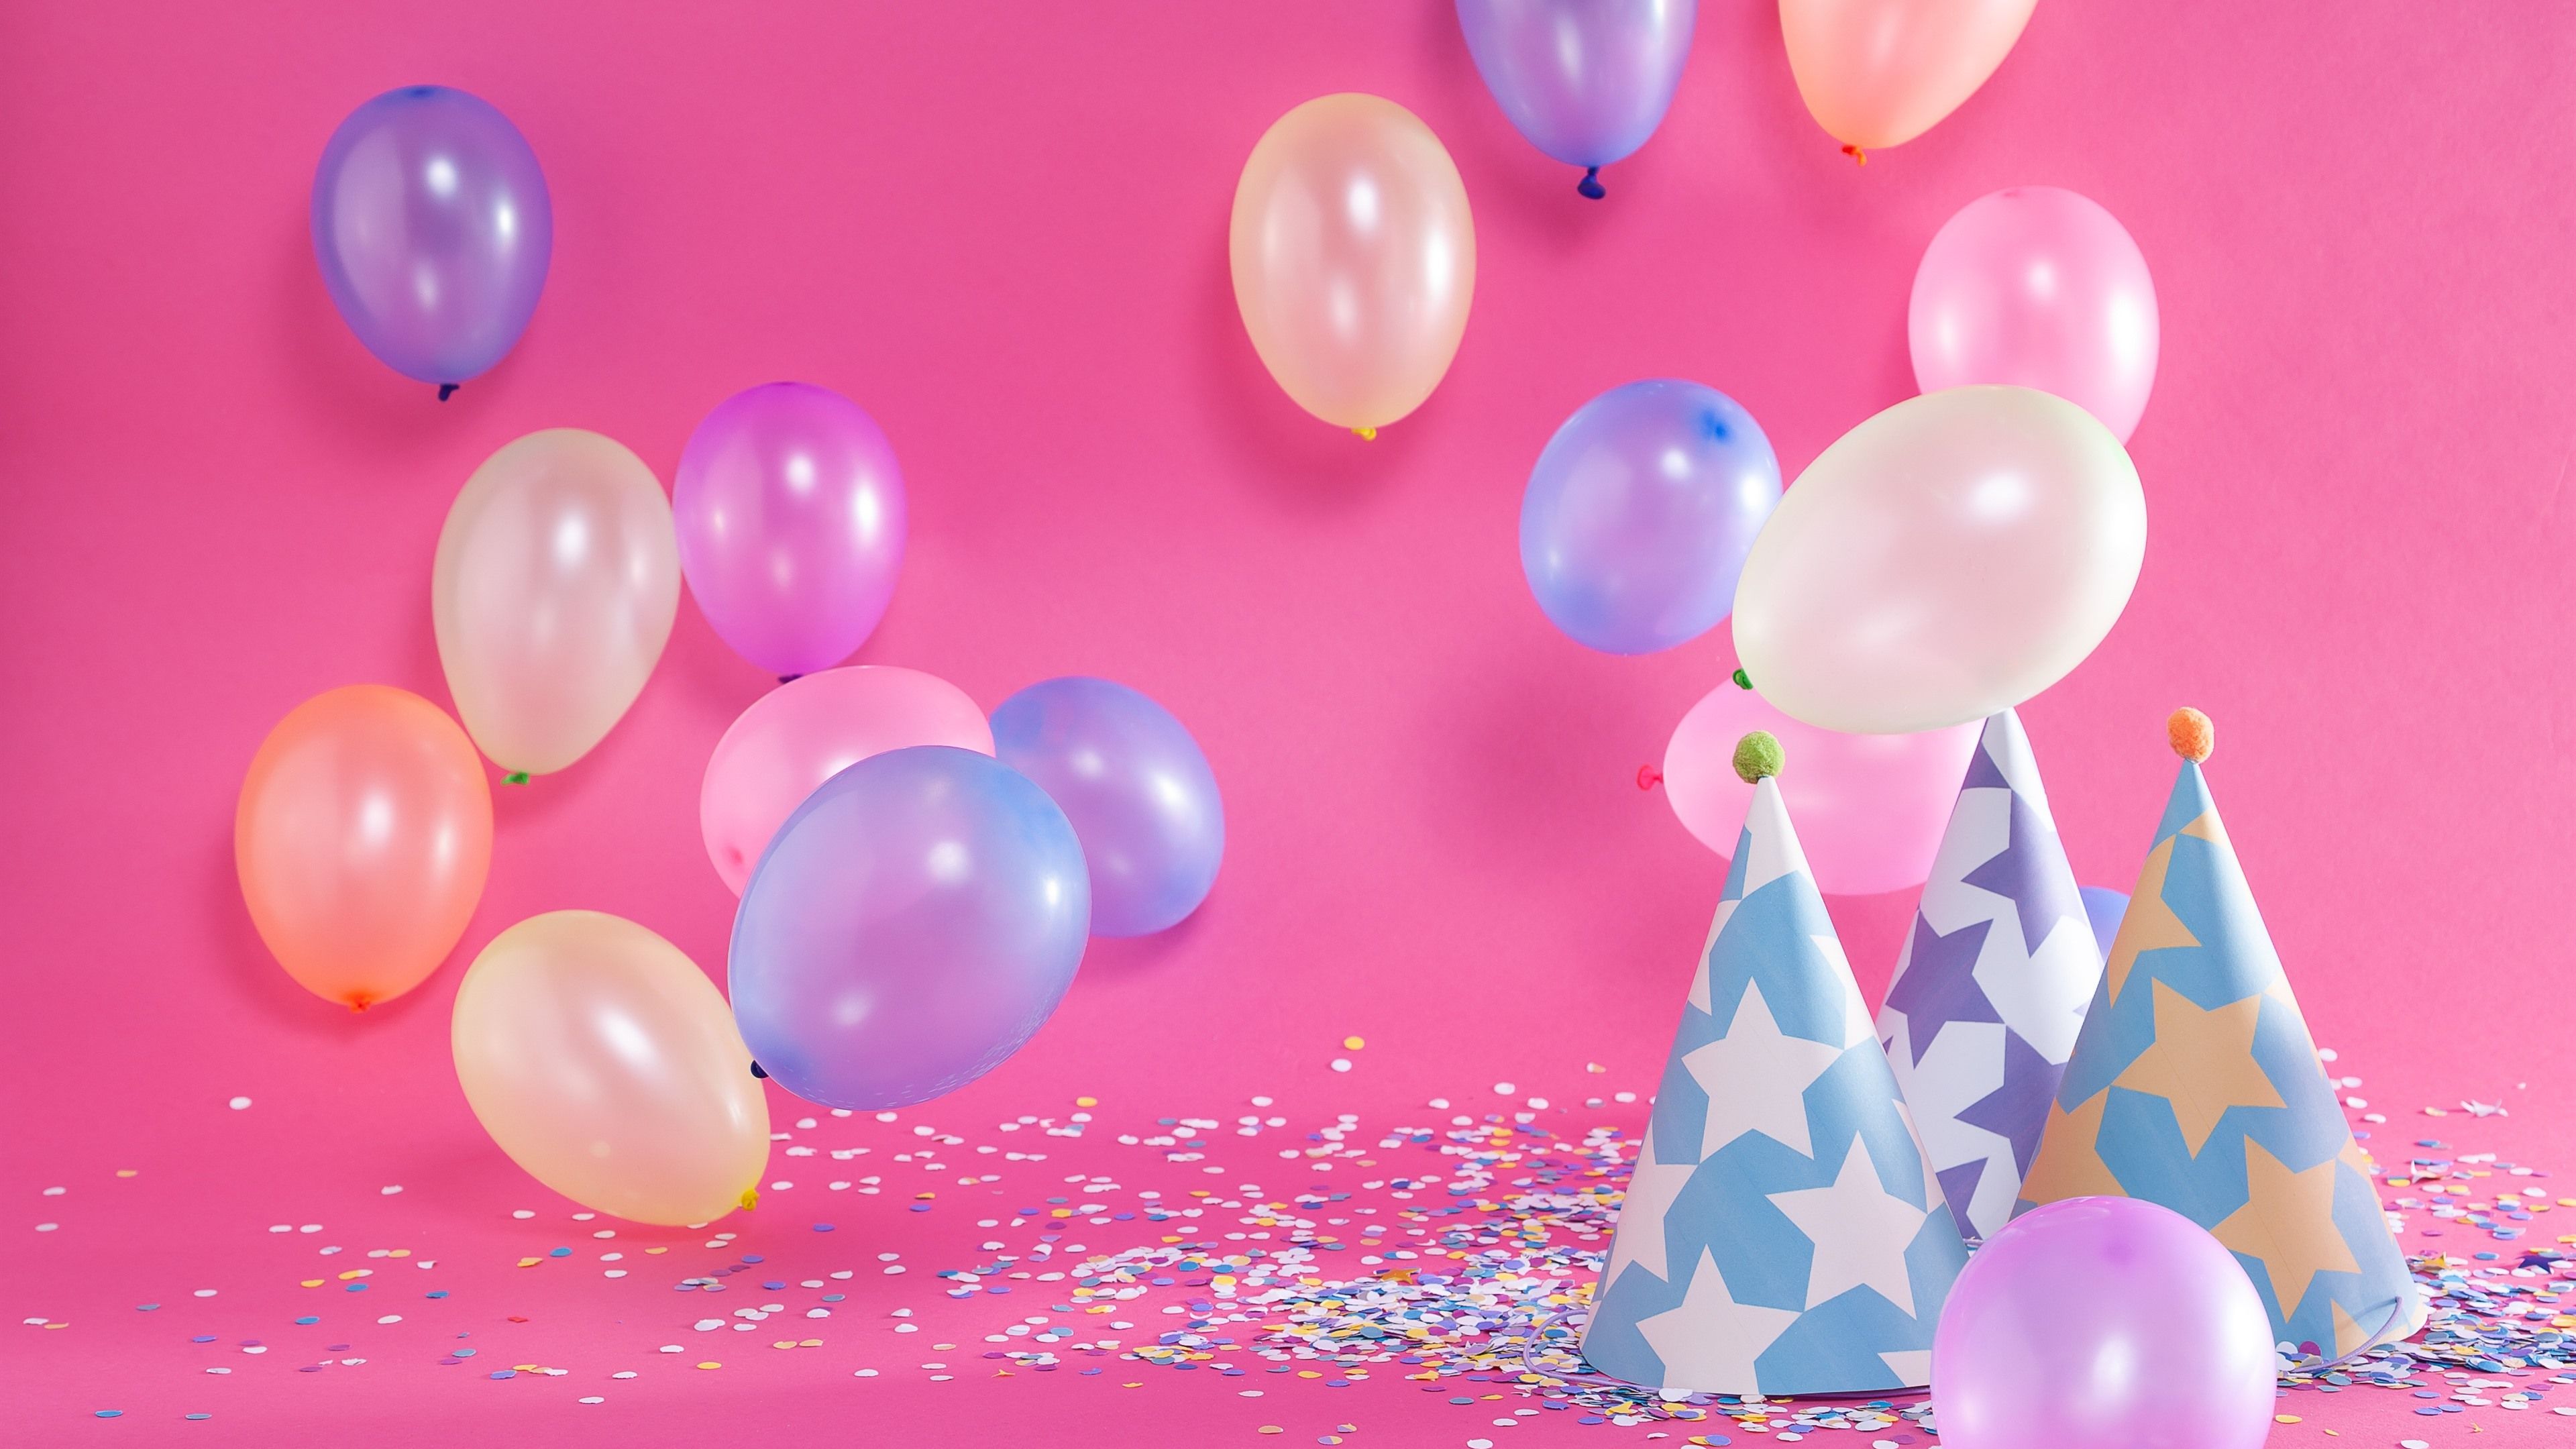 Wallpaper Some colorful balloons, hat, decoration, Birthday 3840x2160 UHD 4K Picture, Image